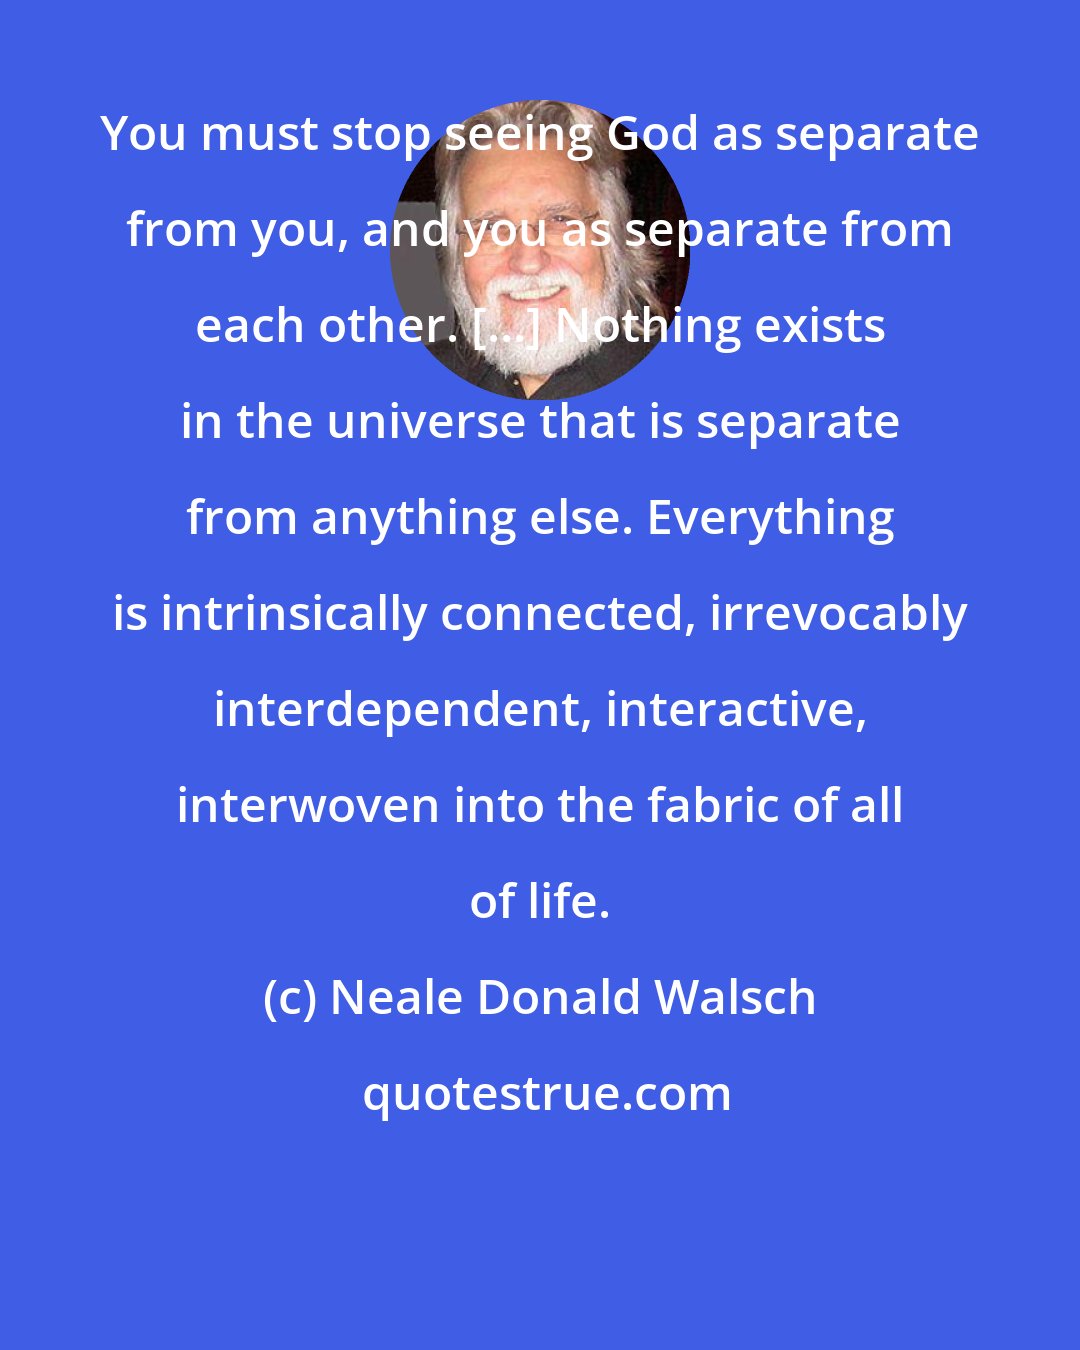 Neale Donald Walsch: You must stop seeing God as separate from you, and you as separate from each other. [...] Nothing exists in the universe that is separate from anything else. Everything is intrinsically connected, irrevocably interdependent, interactive, interwoven into the fabric of all of life.